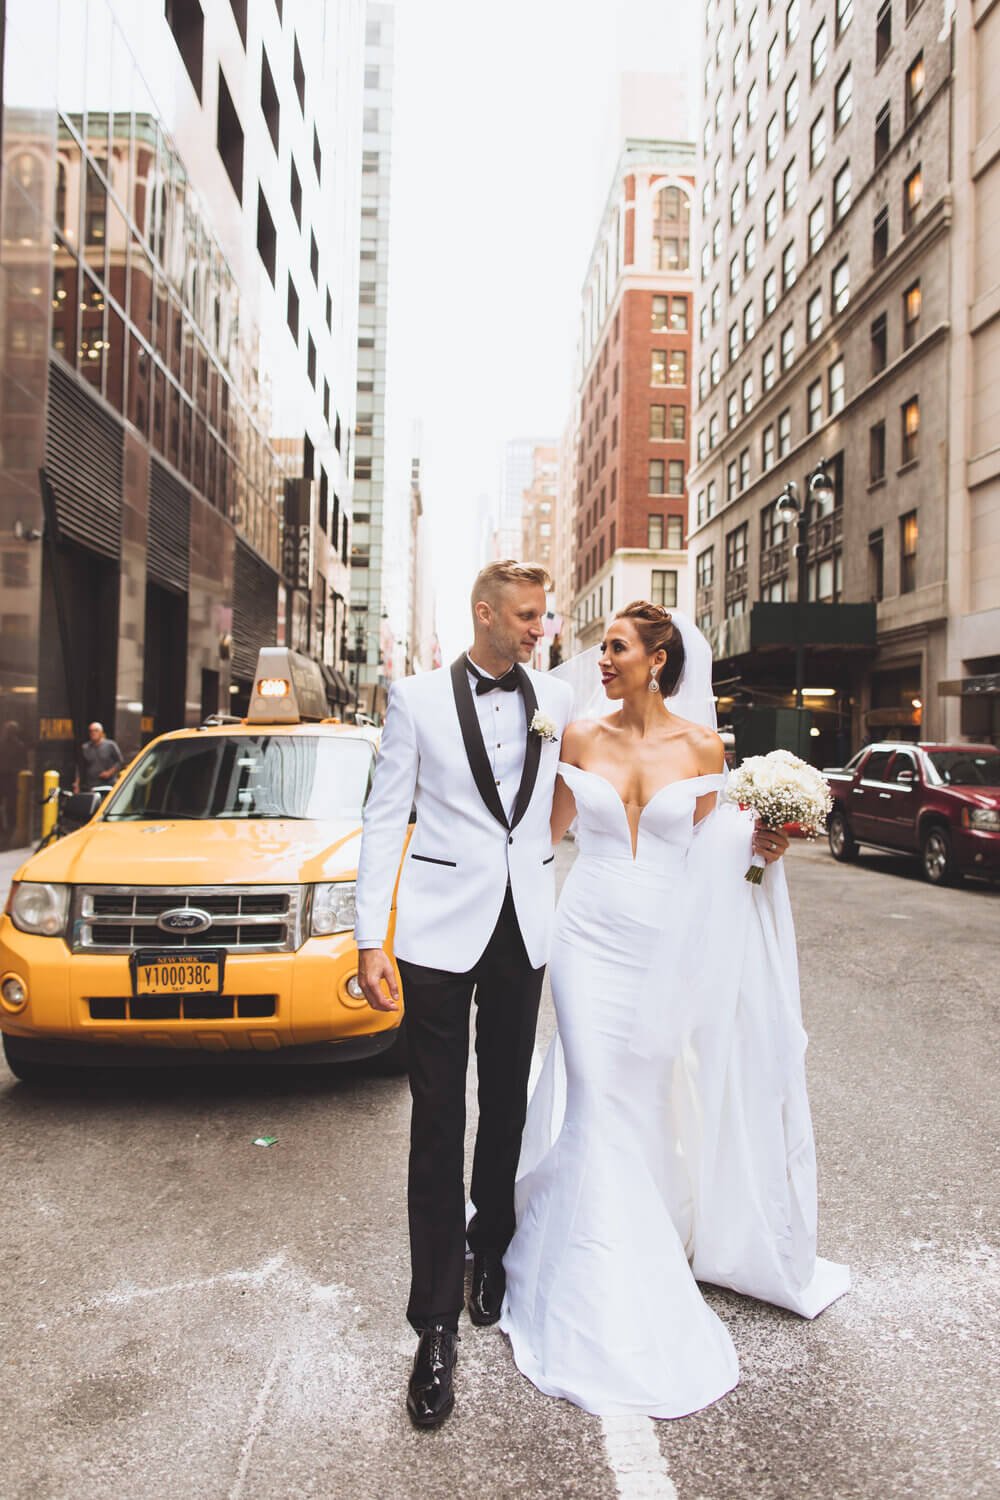 Chic bride and groom walking through busy NYC streets, encapsulating the urban elegance of a city wedding